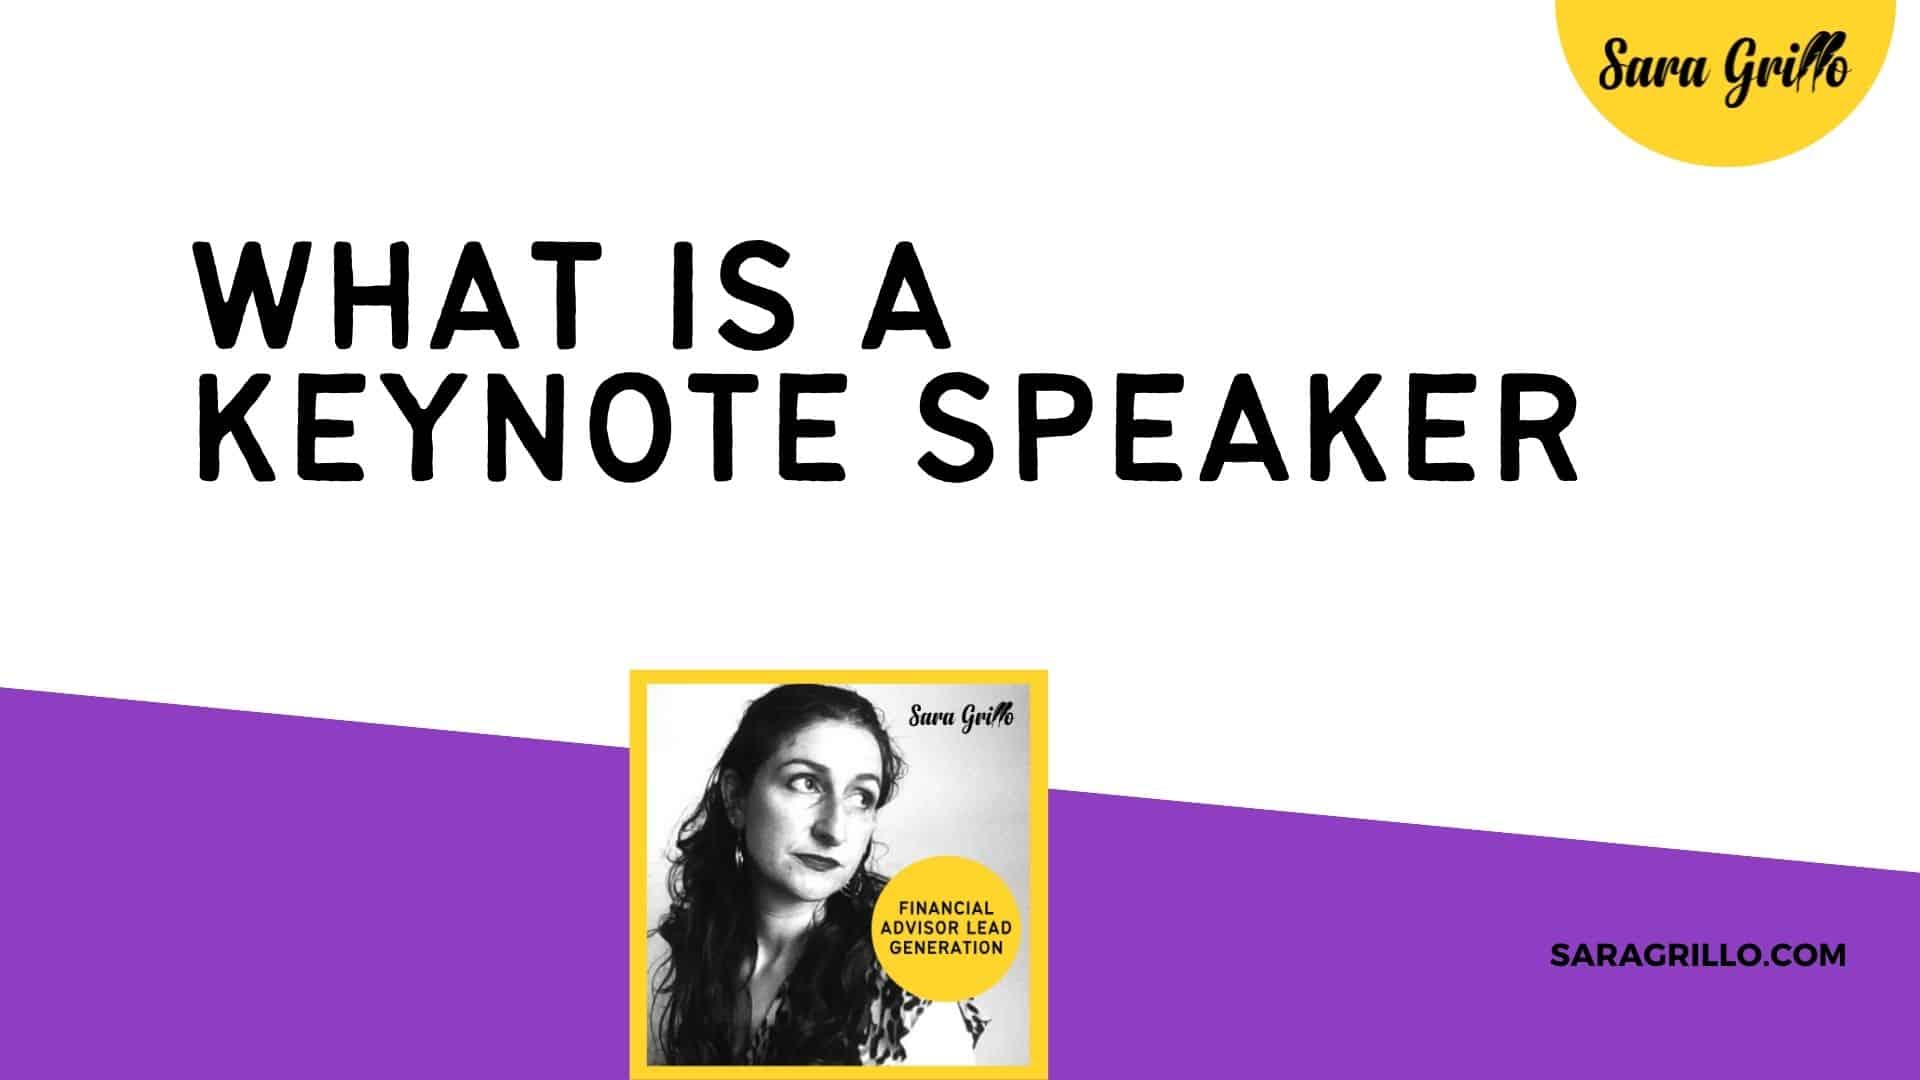 What is a keynote speaker? Let's talk about the meaning and definition of this role.